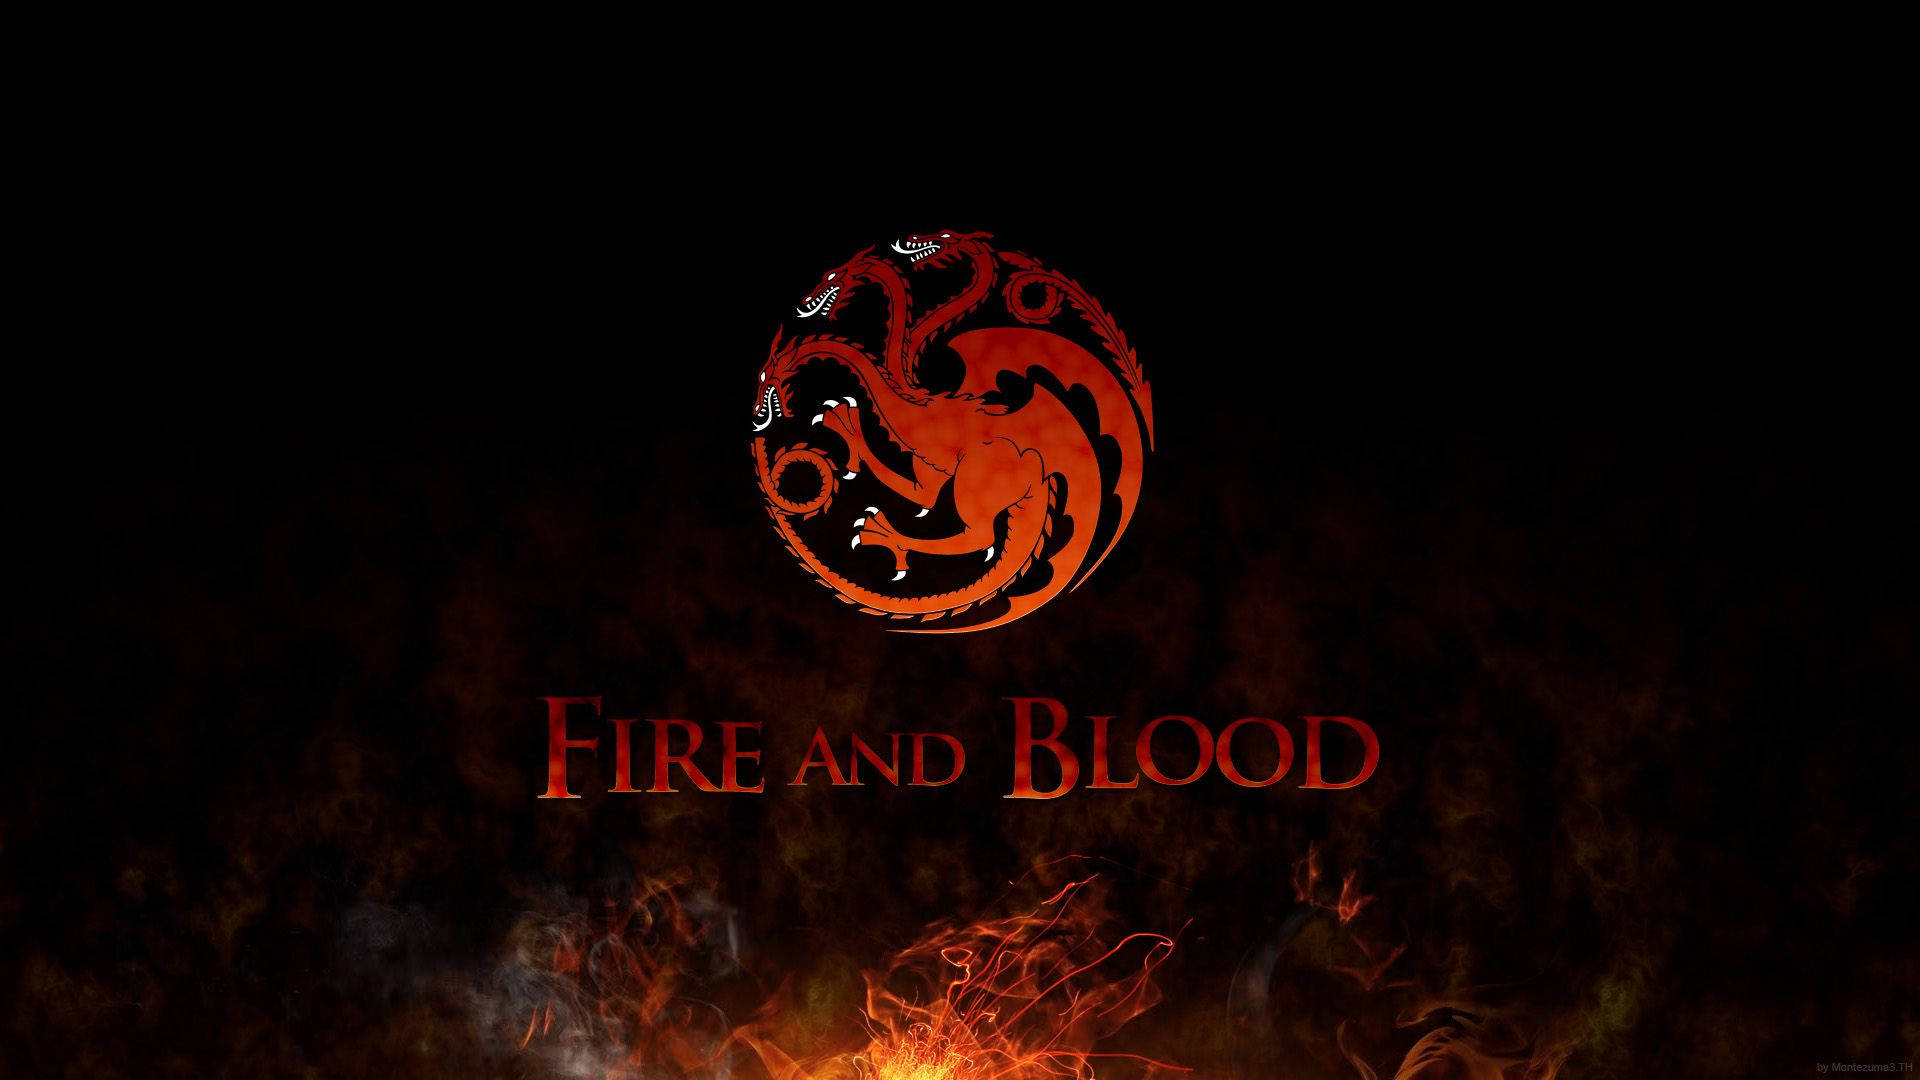 Free Game Of Thrones Wallpaper Downloads, [200+] Game Of Thrones Wallpapers  for FREE 